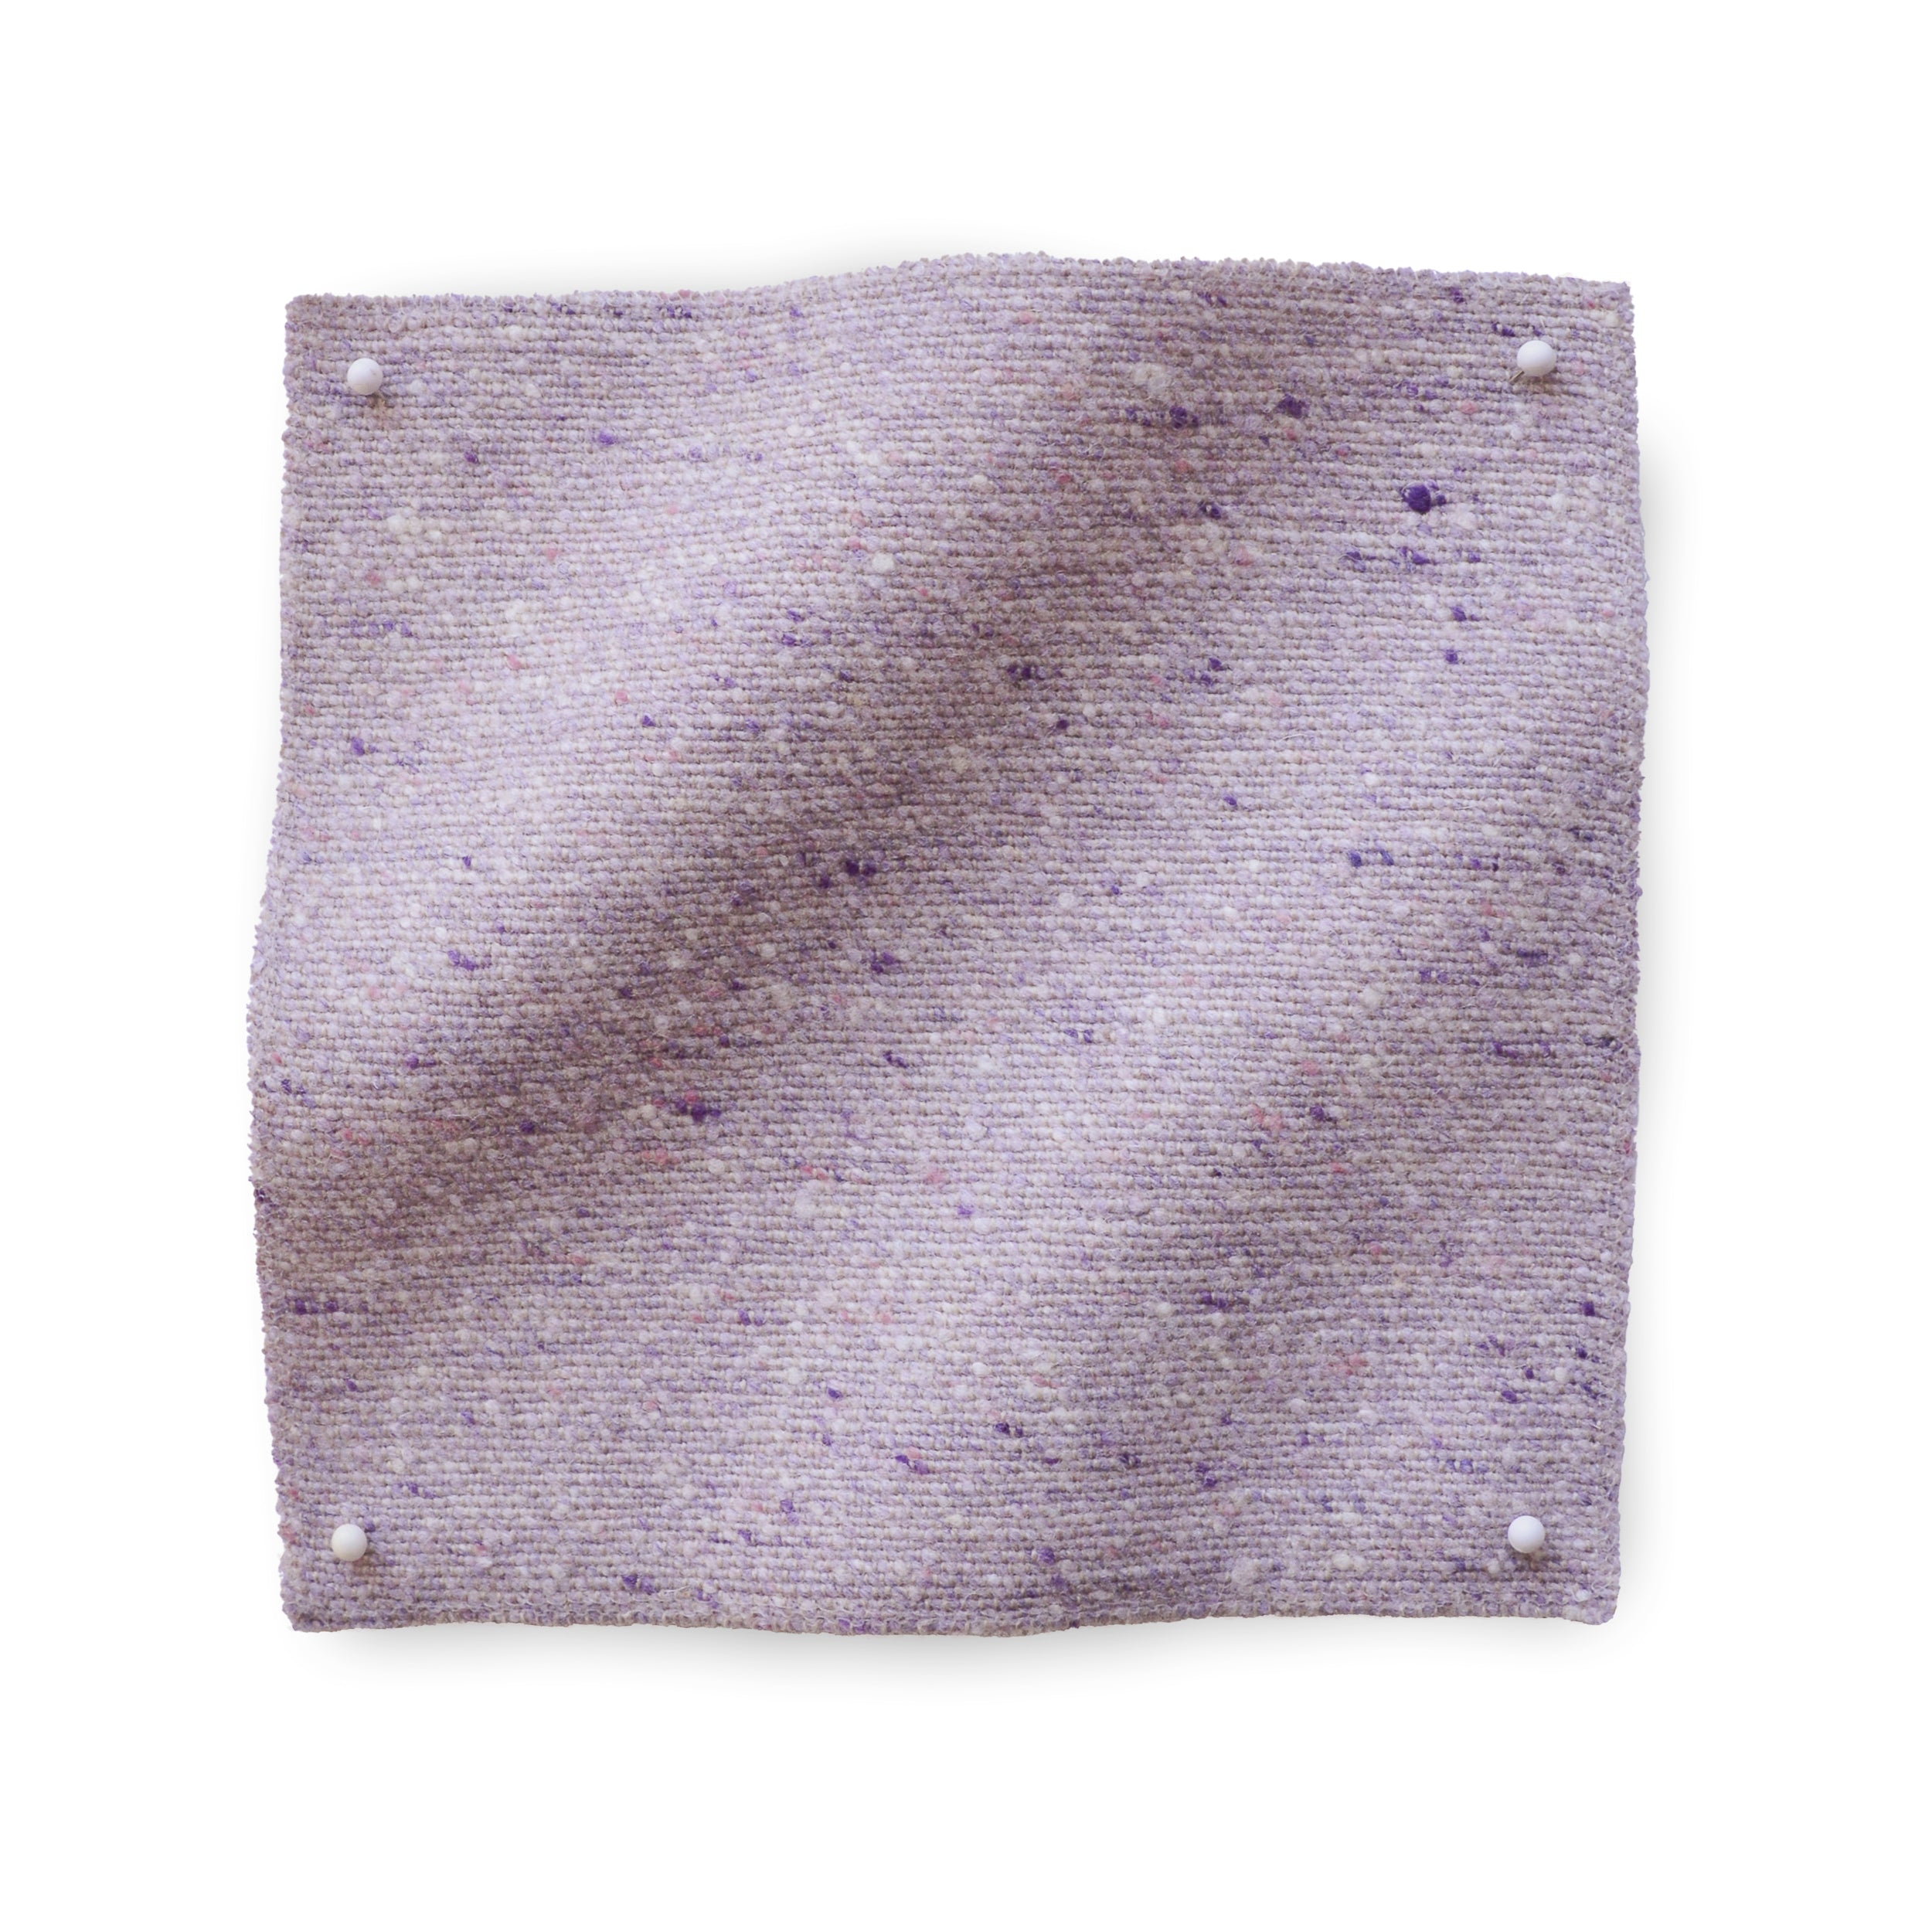 Square fabric swatch of heathered wool in a violet colorway.